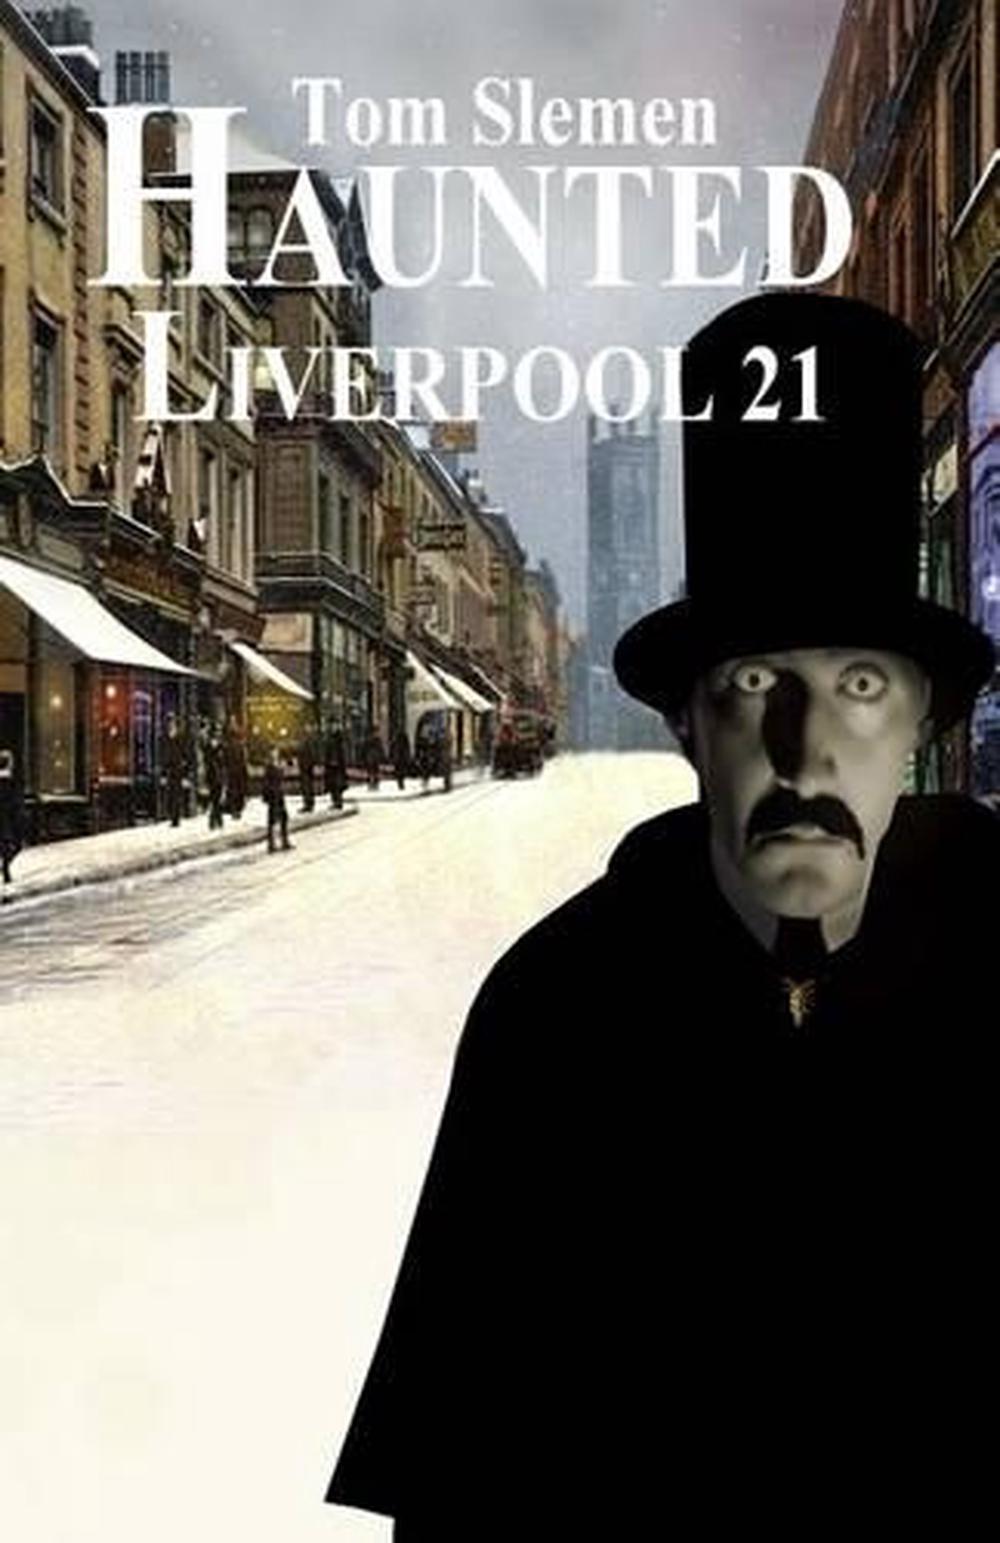 Haunted Liverpool 21 by Tom Slemen (English) Paperback Book Free